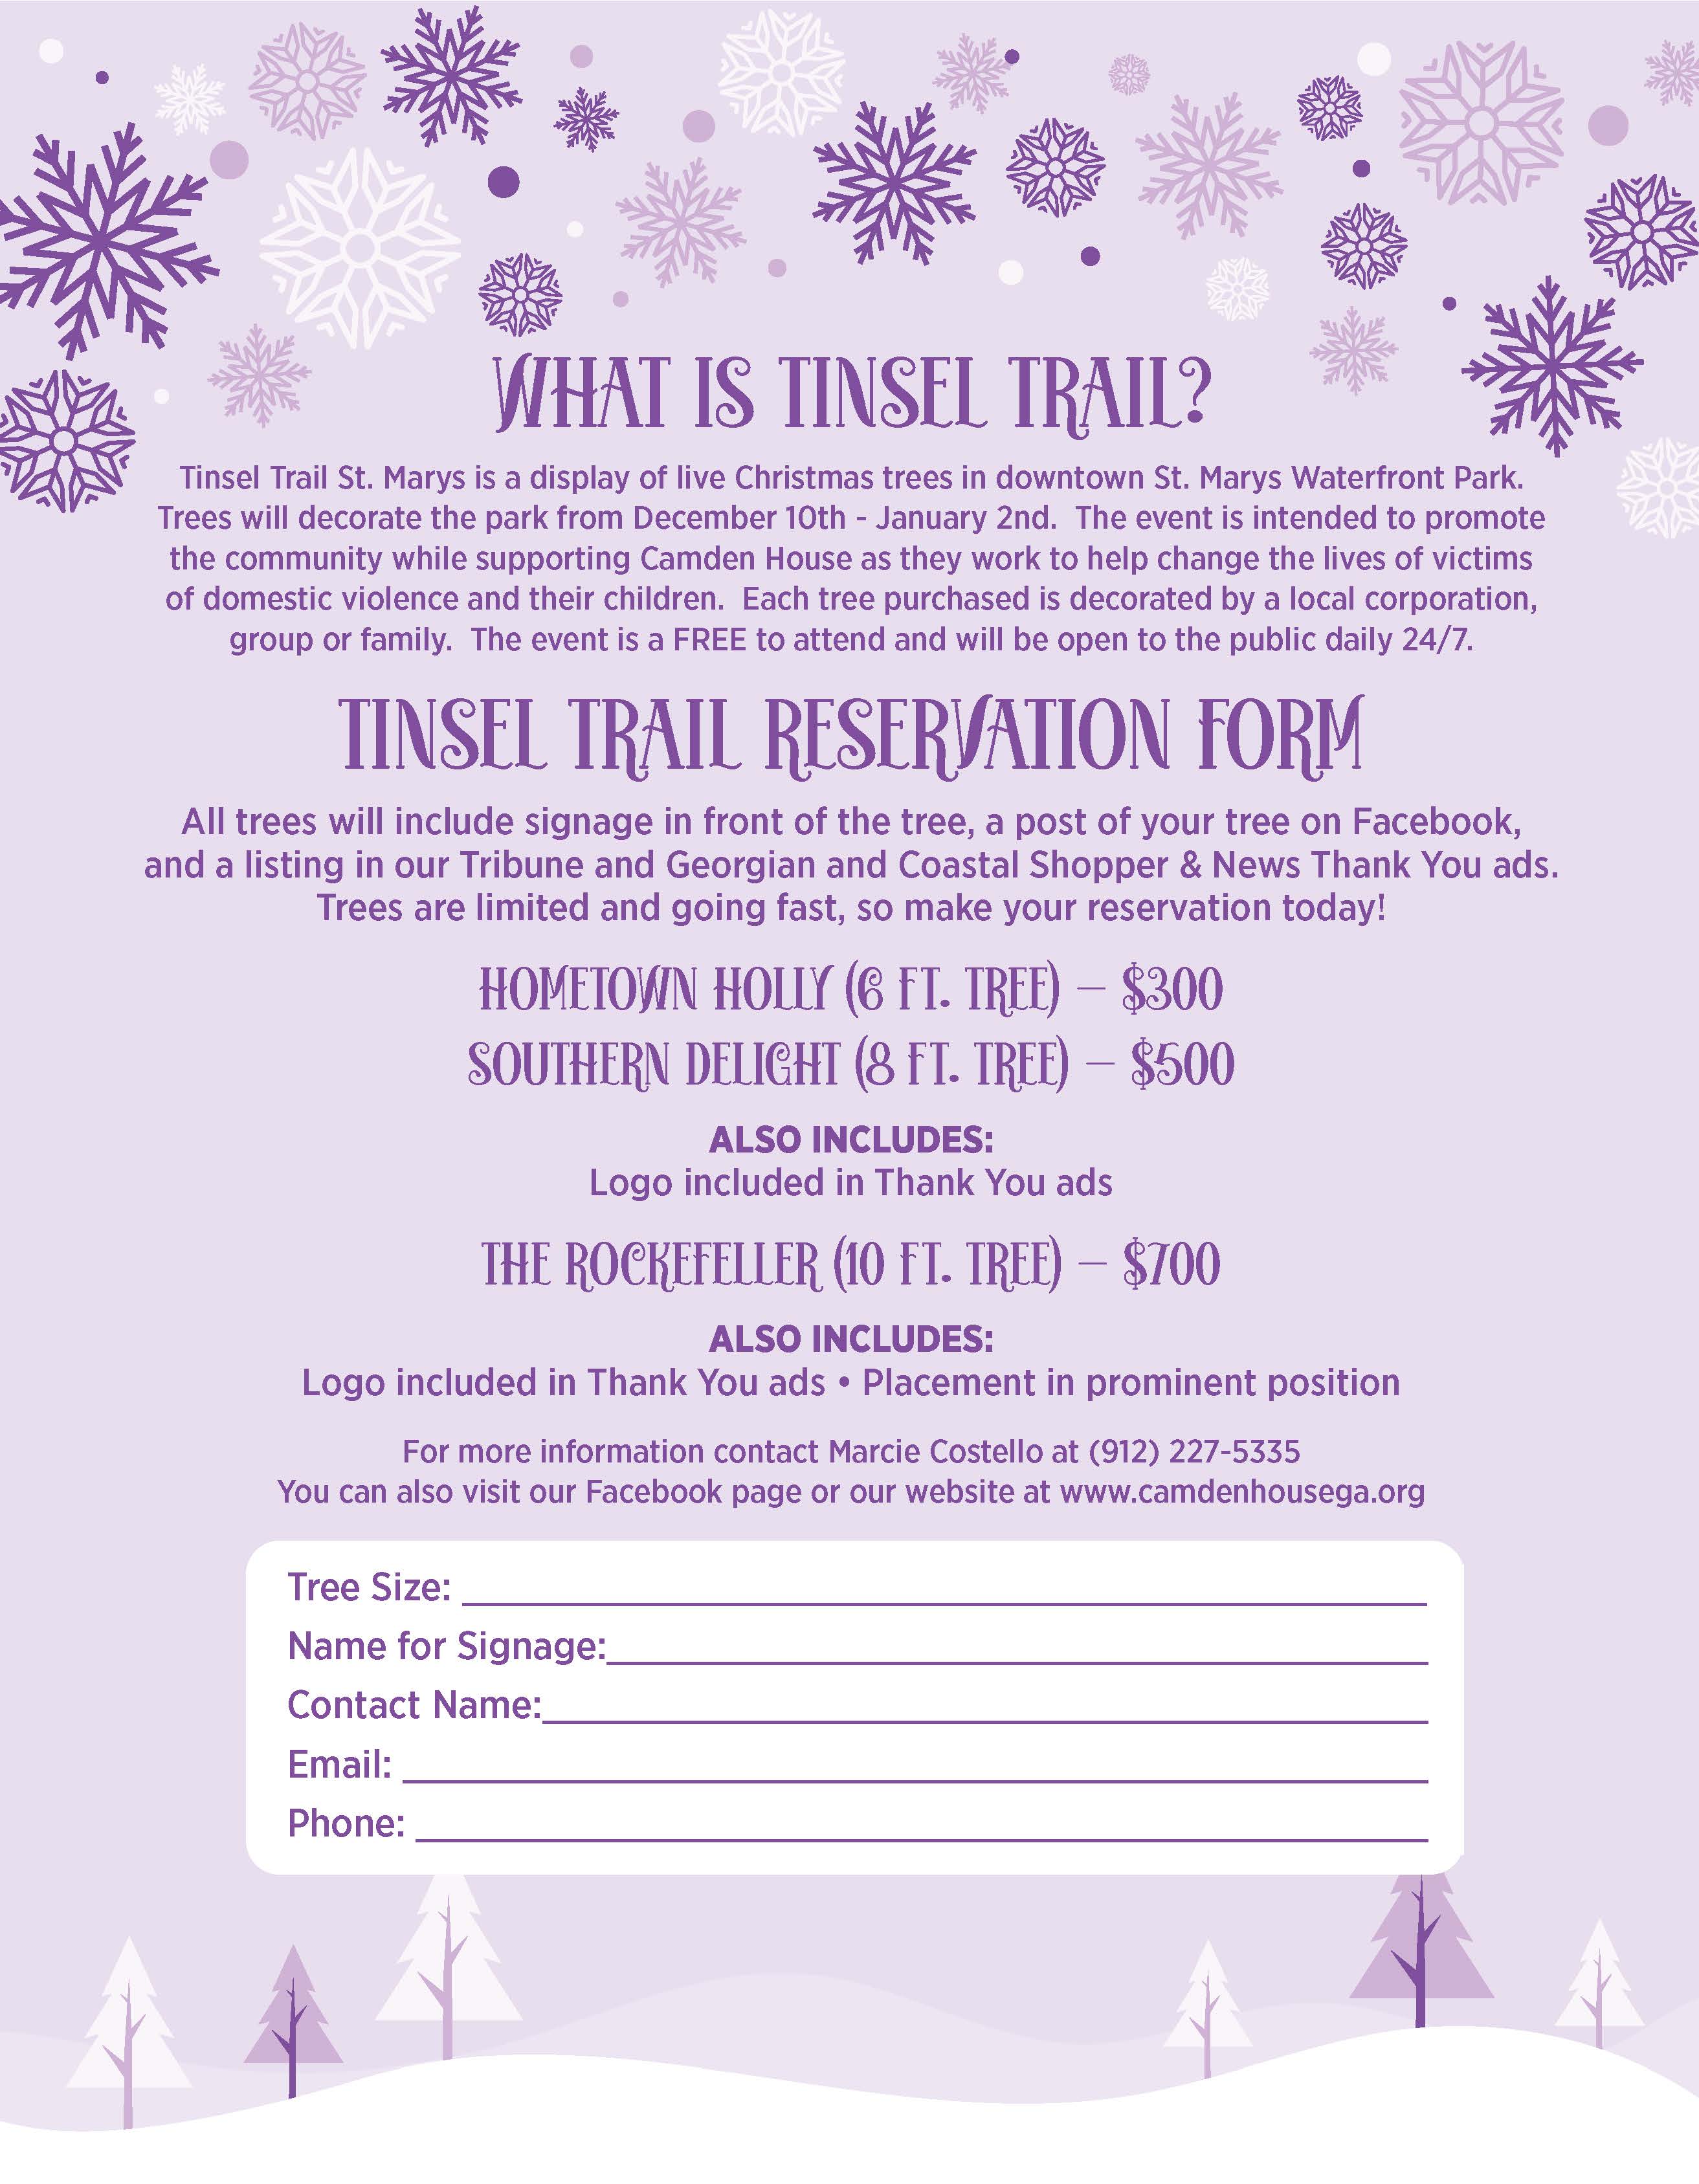 Tinsel Trail Reservation Form